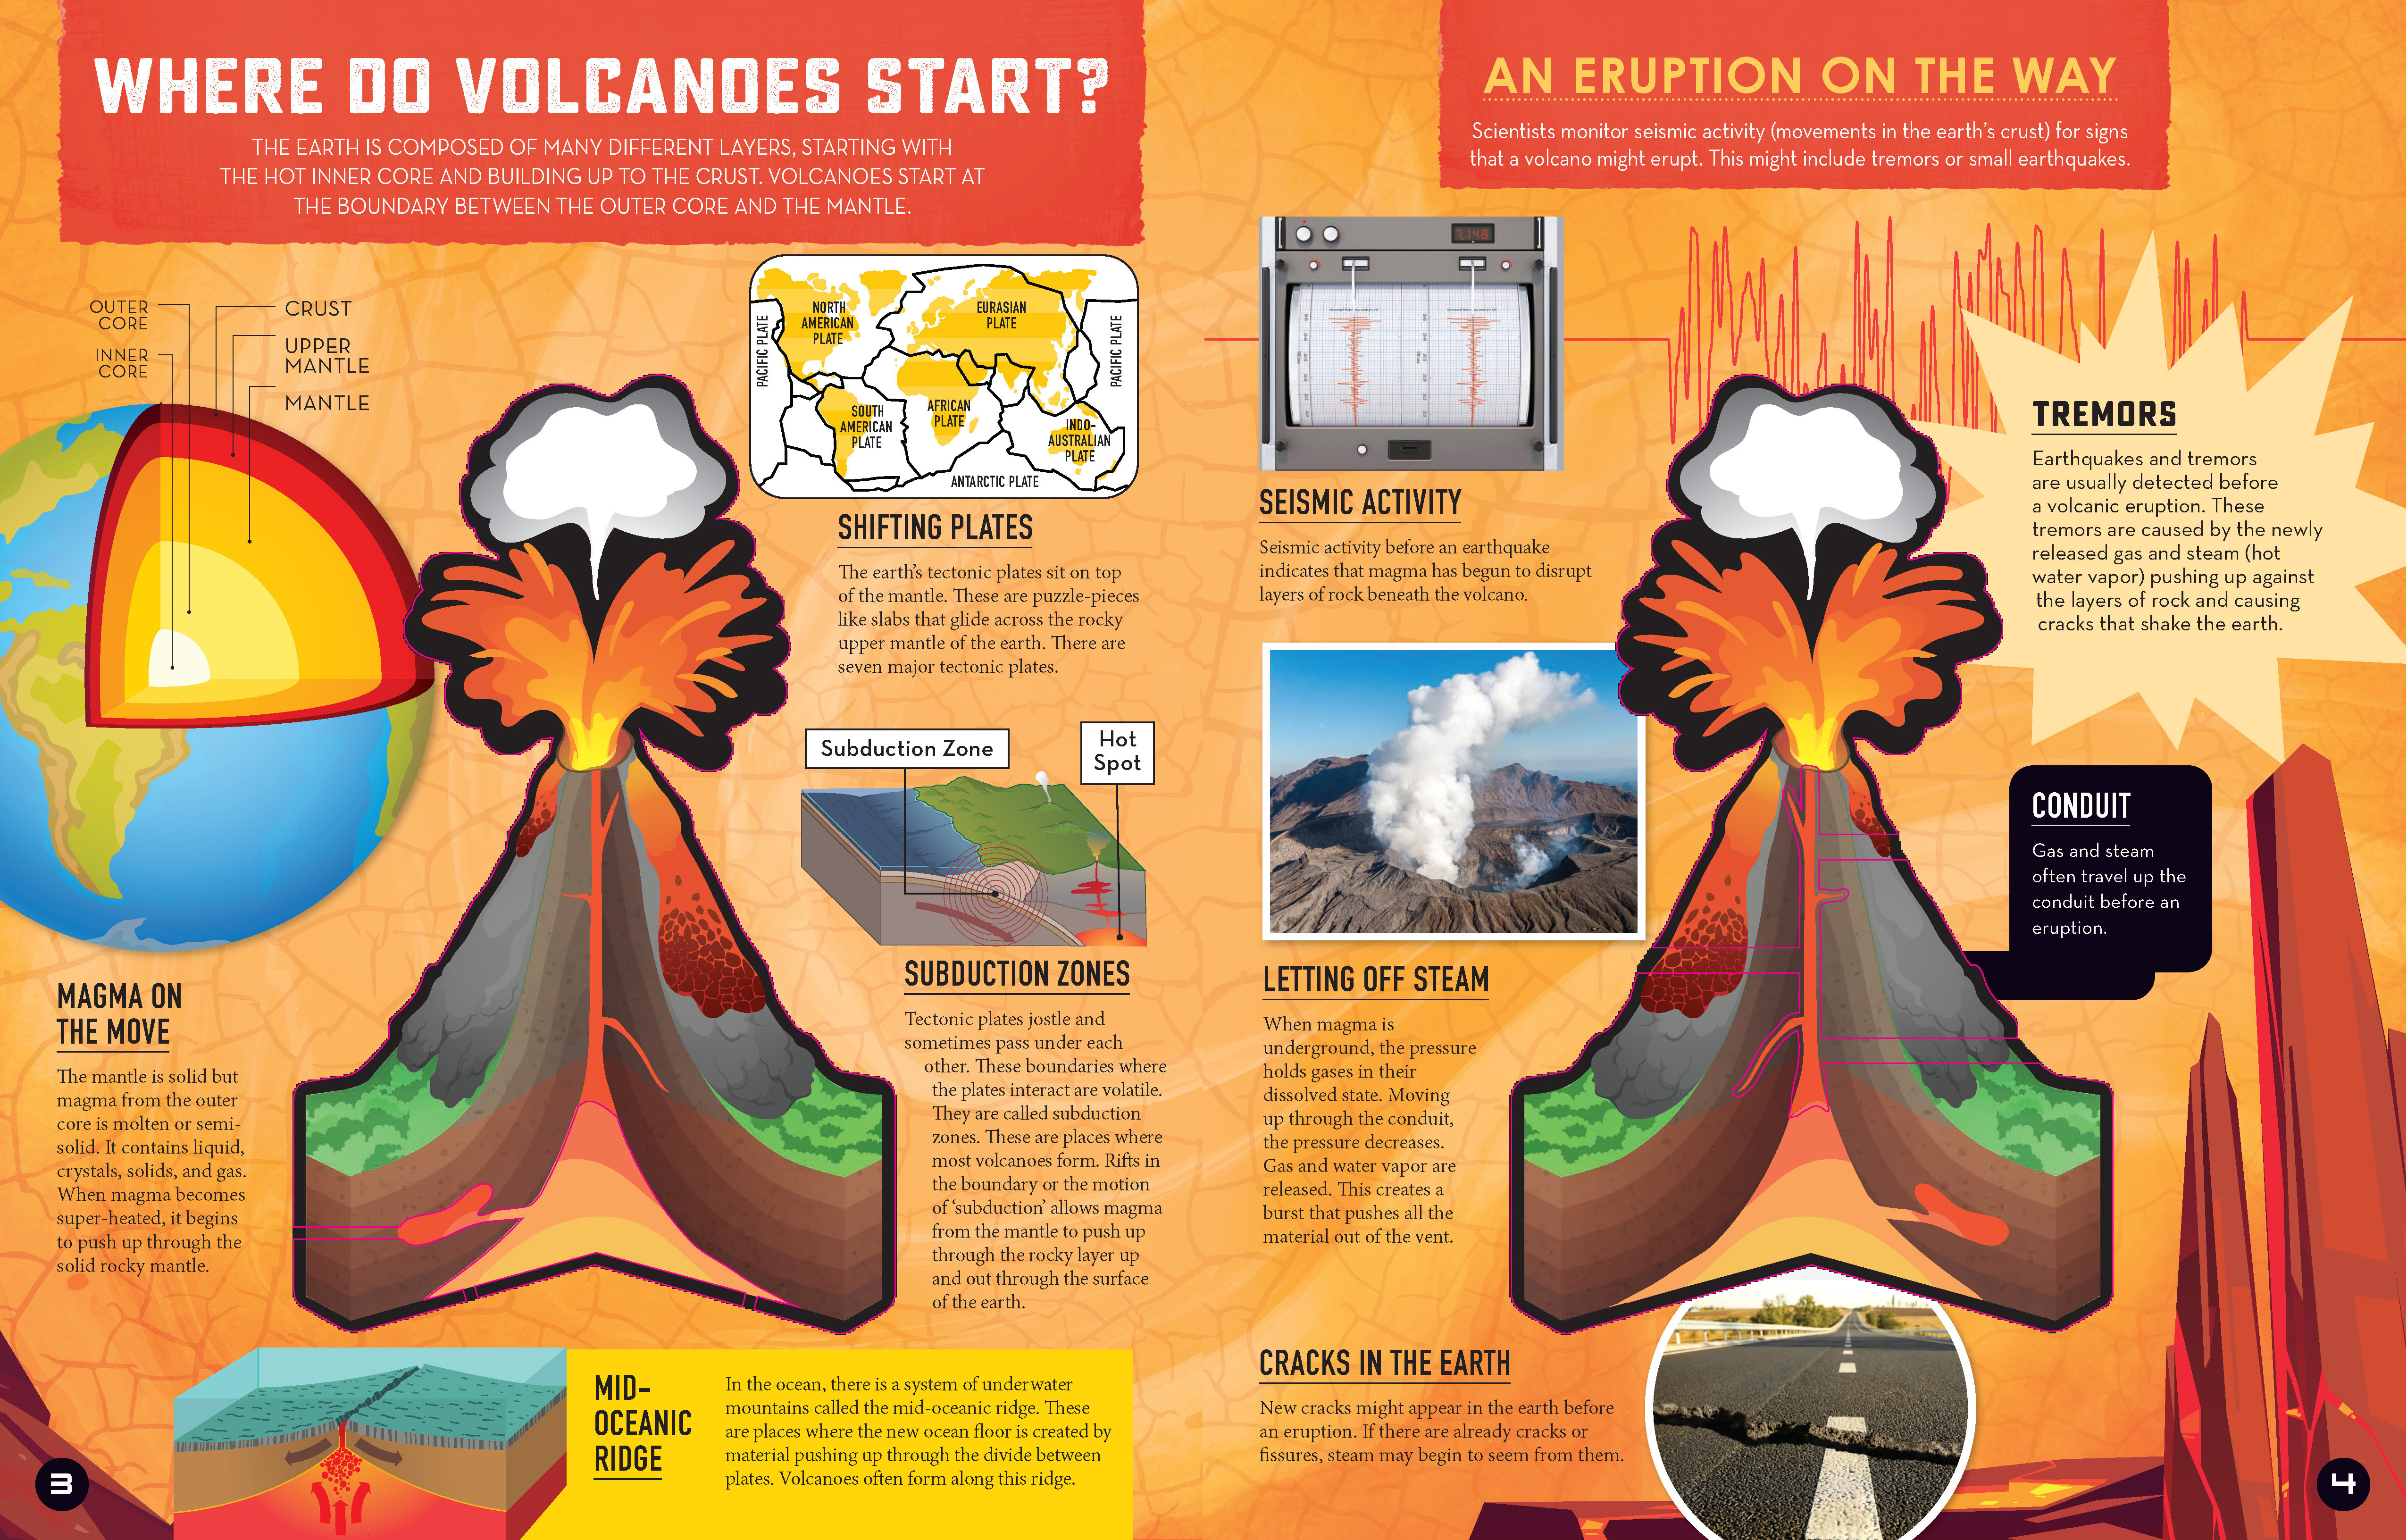 Inside Out Volcano